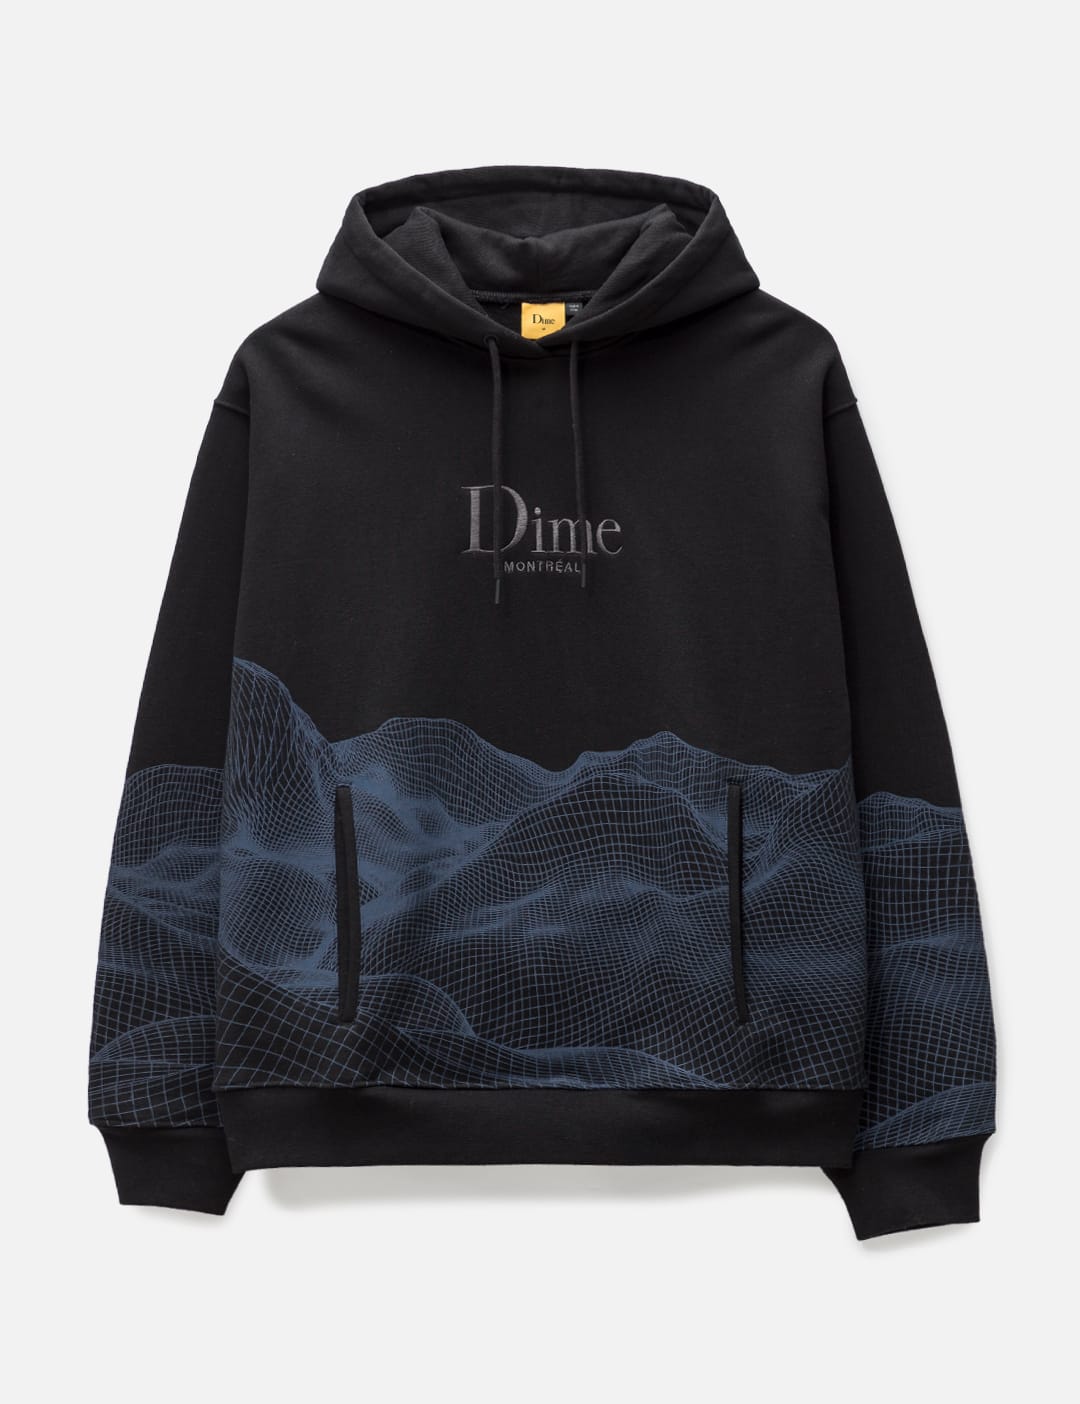 Dime - LANDSCAPE HOODIE | HBX - Globally Curated Fashion and